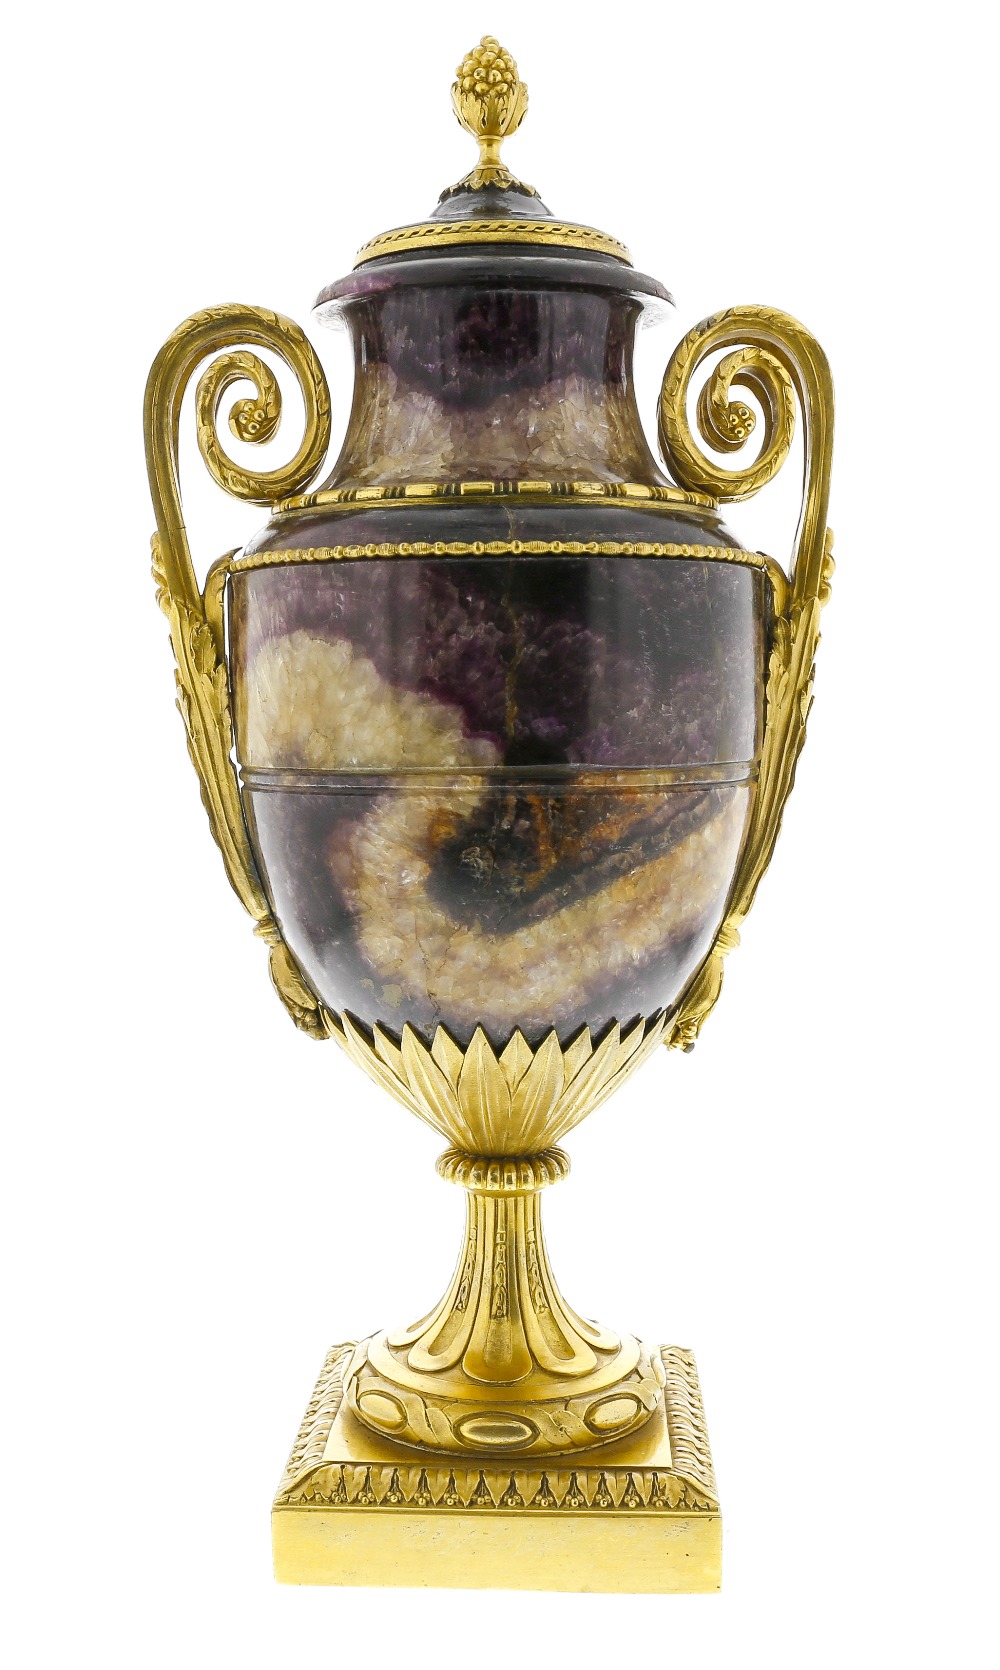 A magnificent ormolu-mounted Blue John urn Late 18th century, attributed to the Boulton workshop,